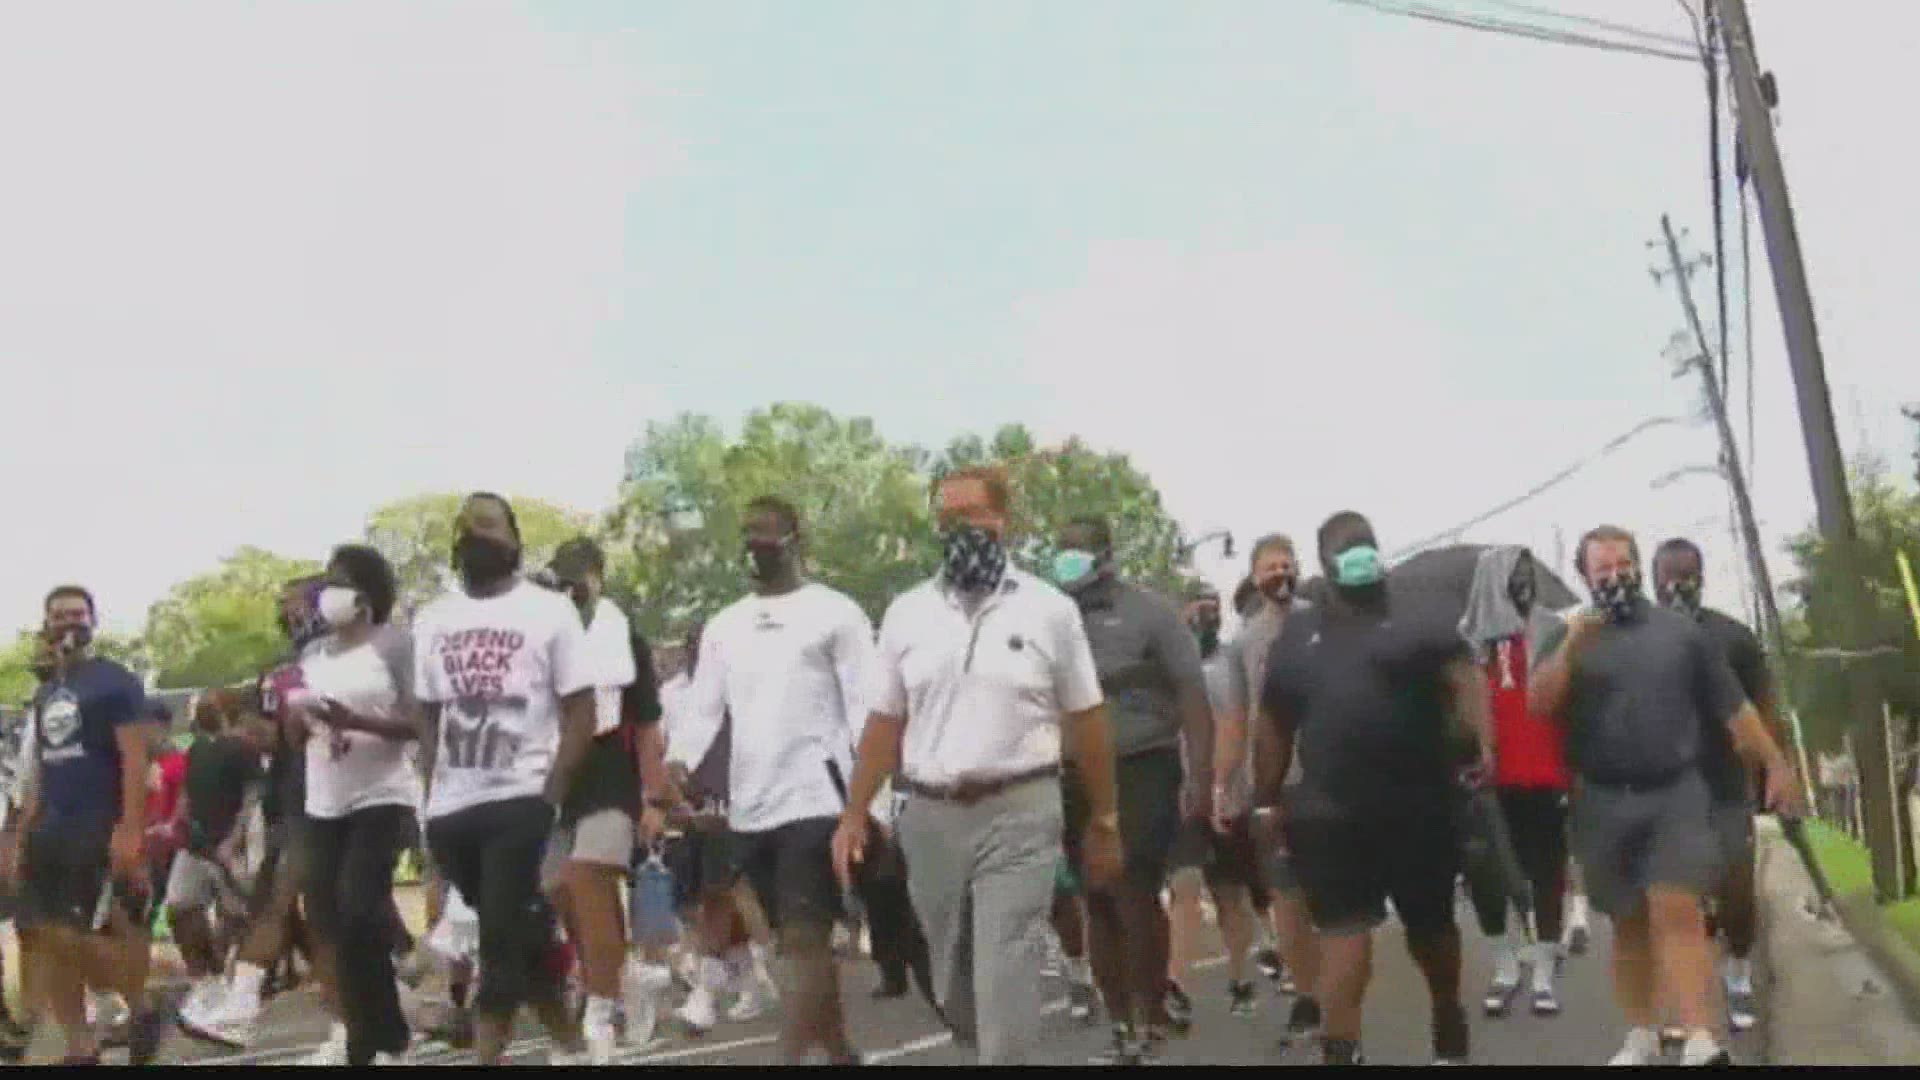 Nick Saban led dozens of his football players and other athletes on a march to protest social injustice and recent incidents of police brutality against Black men a